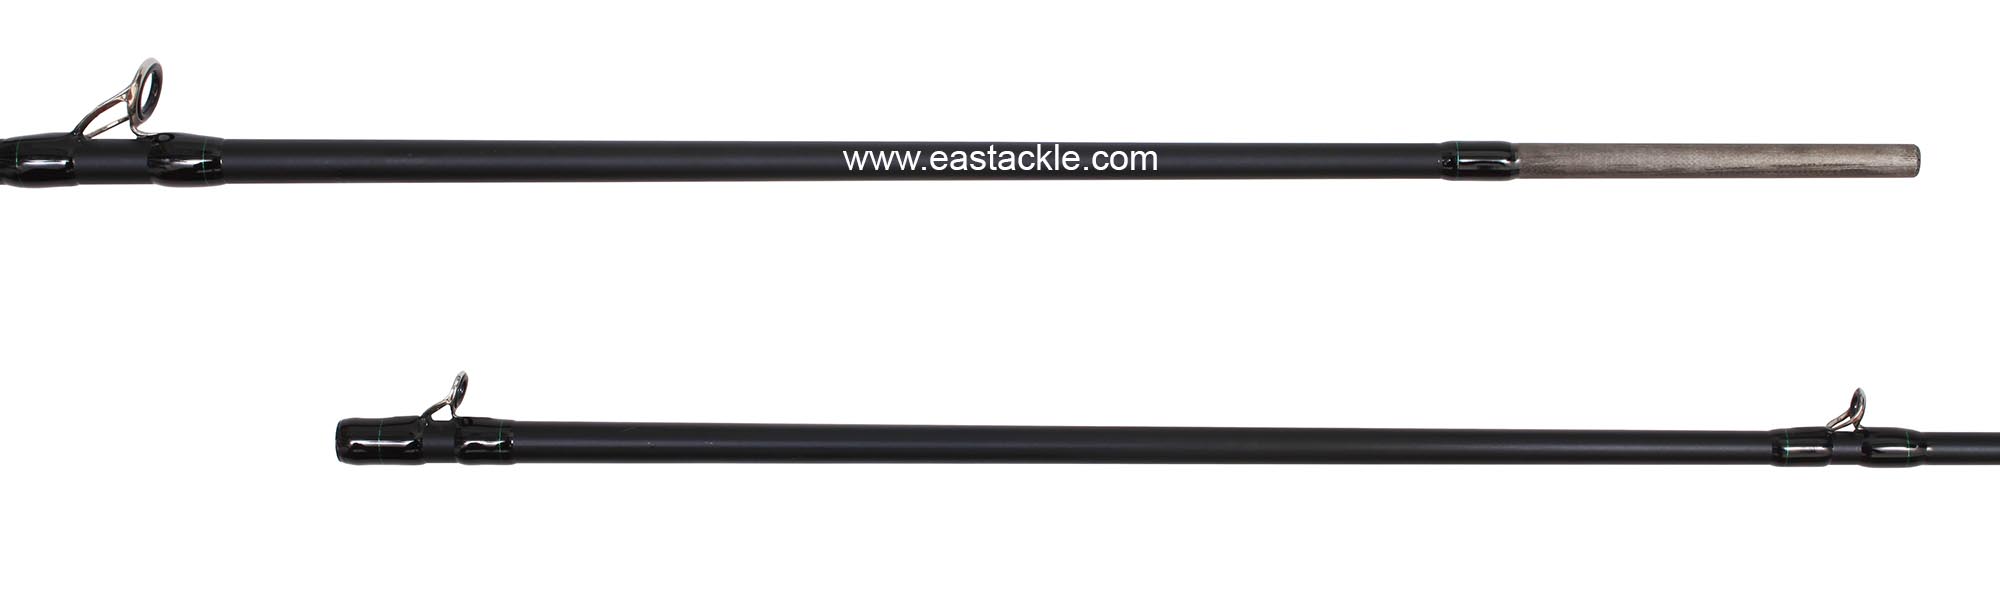 Rapala - Koivu - KVC662MH - Bait Casting Rod - Joint Section (Side View) | Eastackle